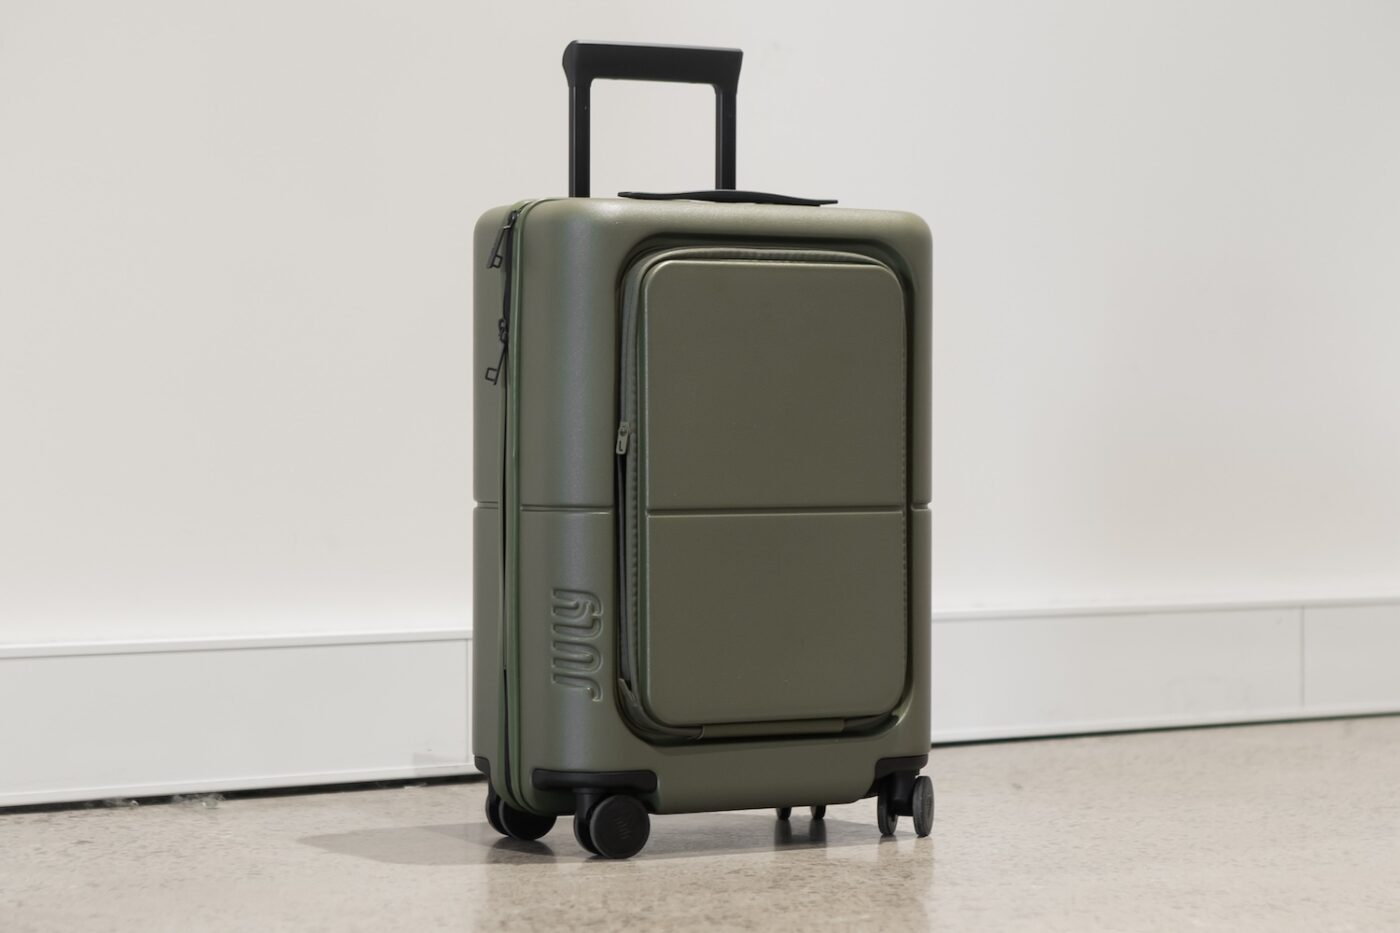 Smart Luggage Review: The Future of Travel